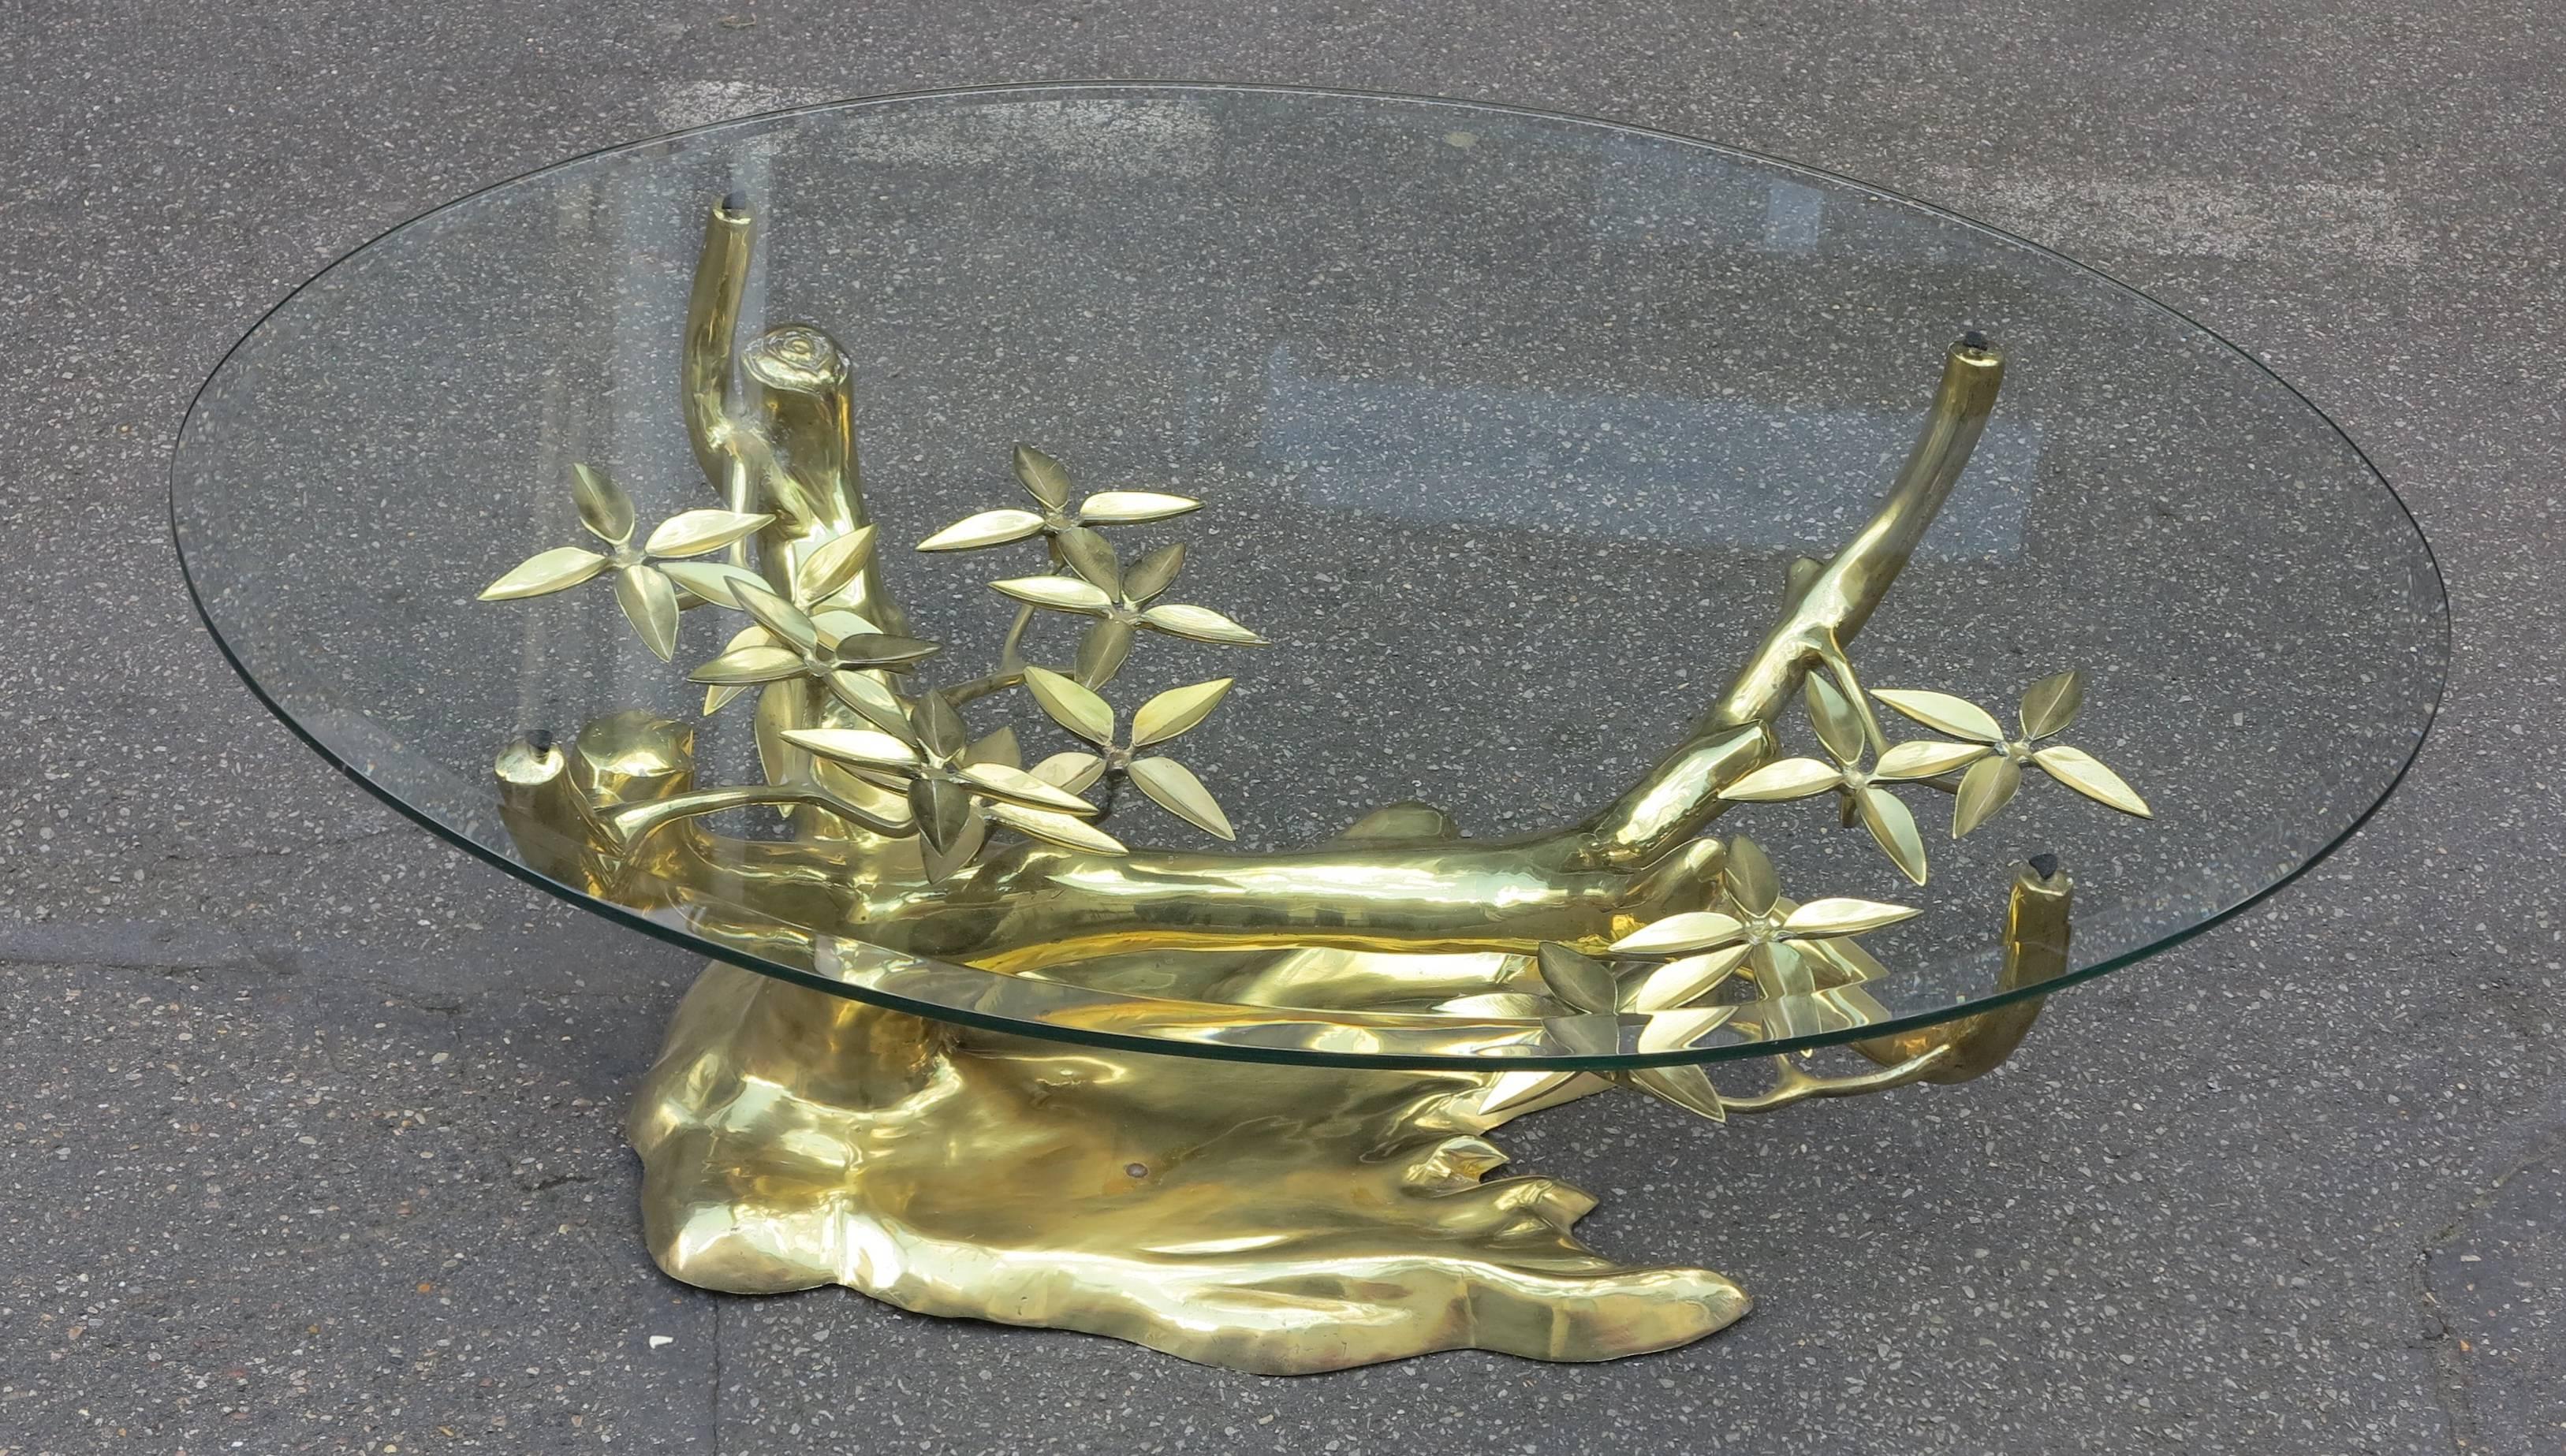 Gilt 1950-1970 Coffee Table in the Bonsai on Golden Bronze Sand Dune